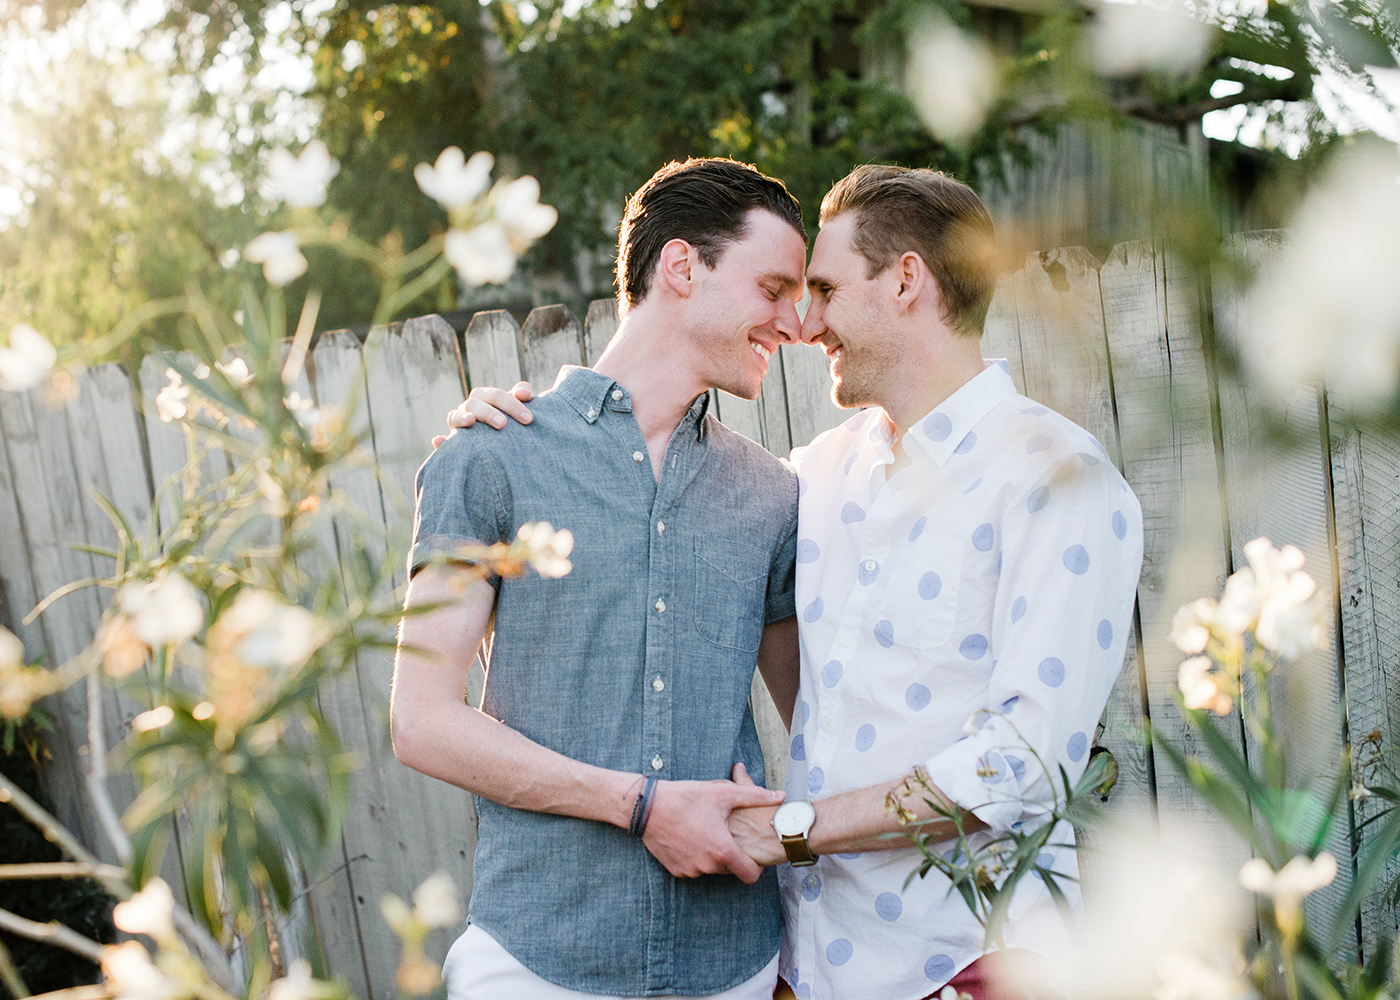 Two men hug and smile as seen through a field of flowers.